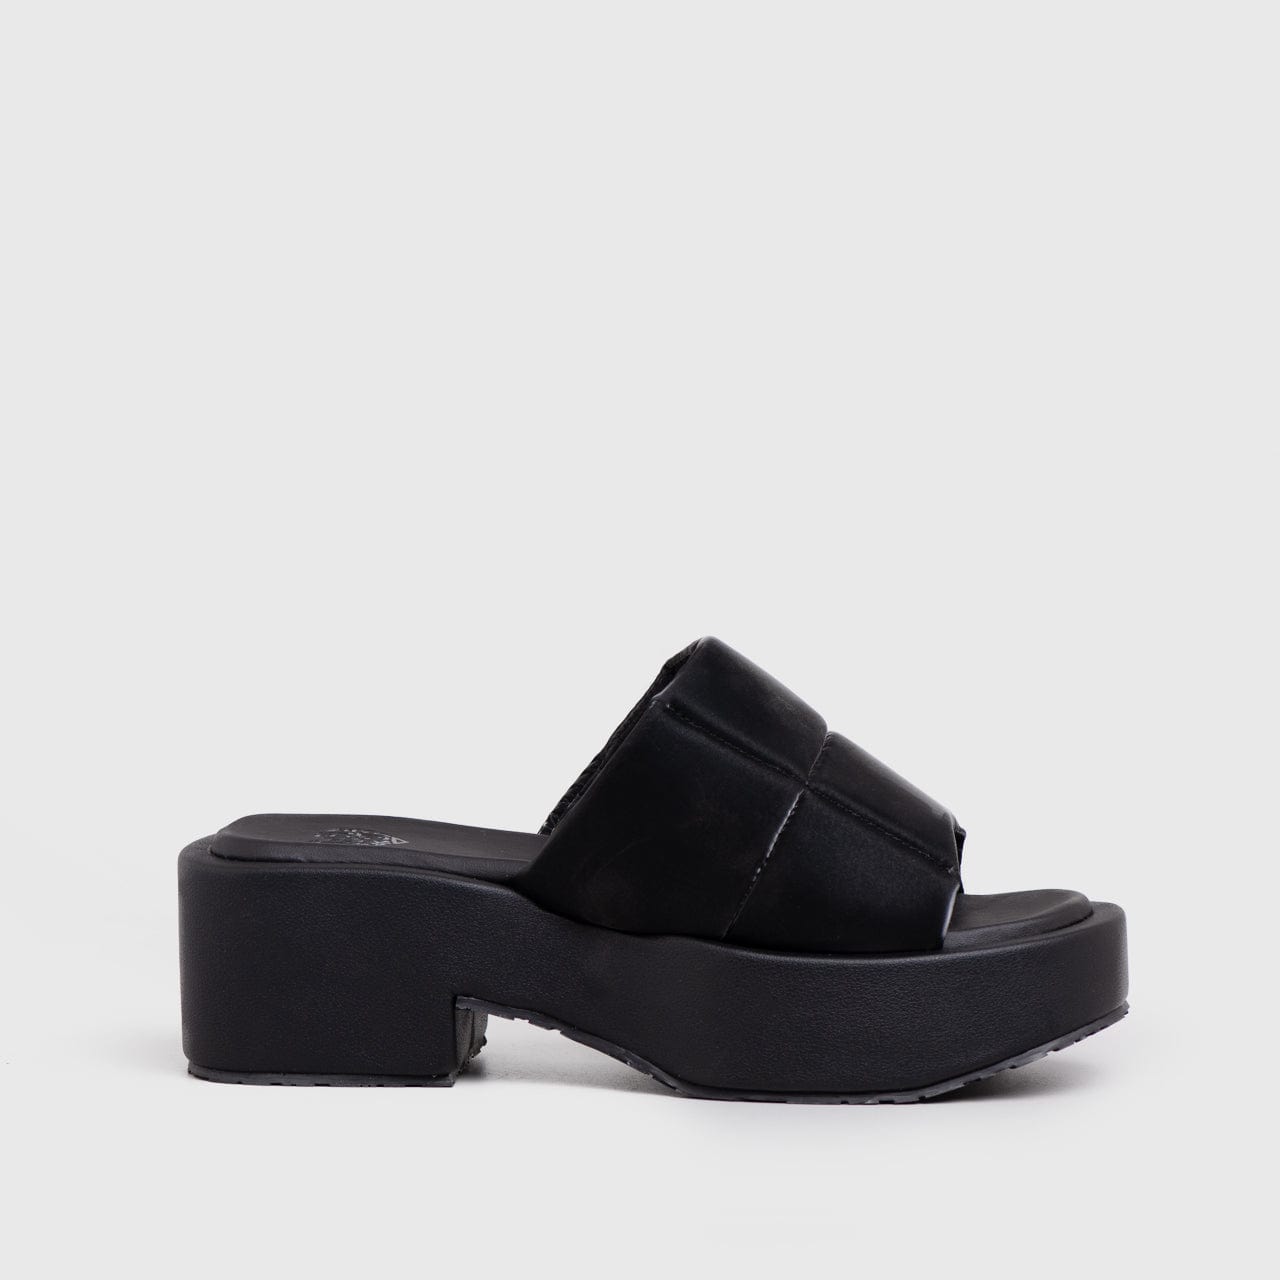 Adorable Projects Official Adorableprojects - Fidelya Wedges Black - Sendal Wanita